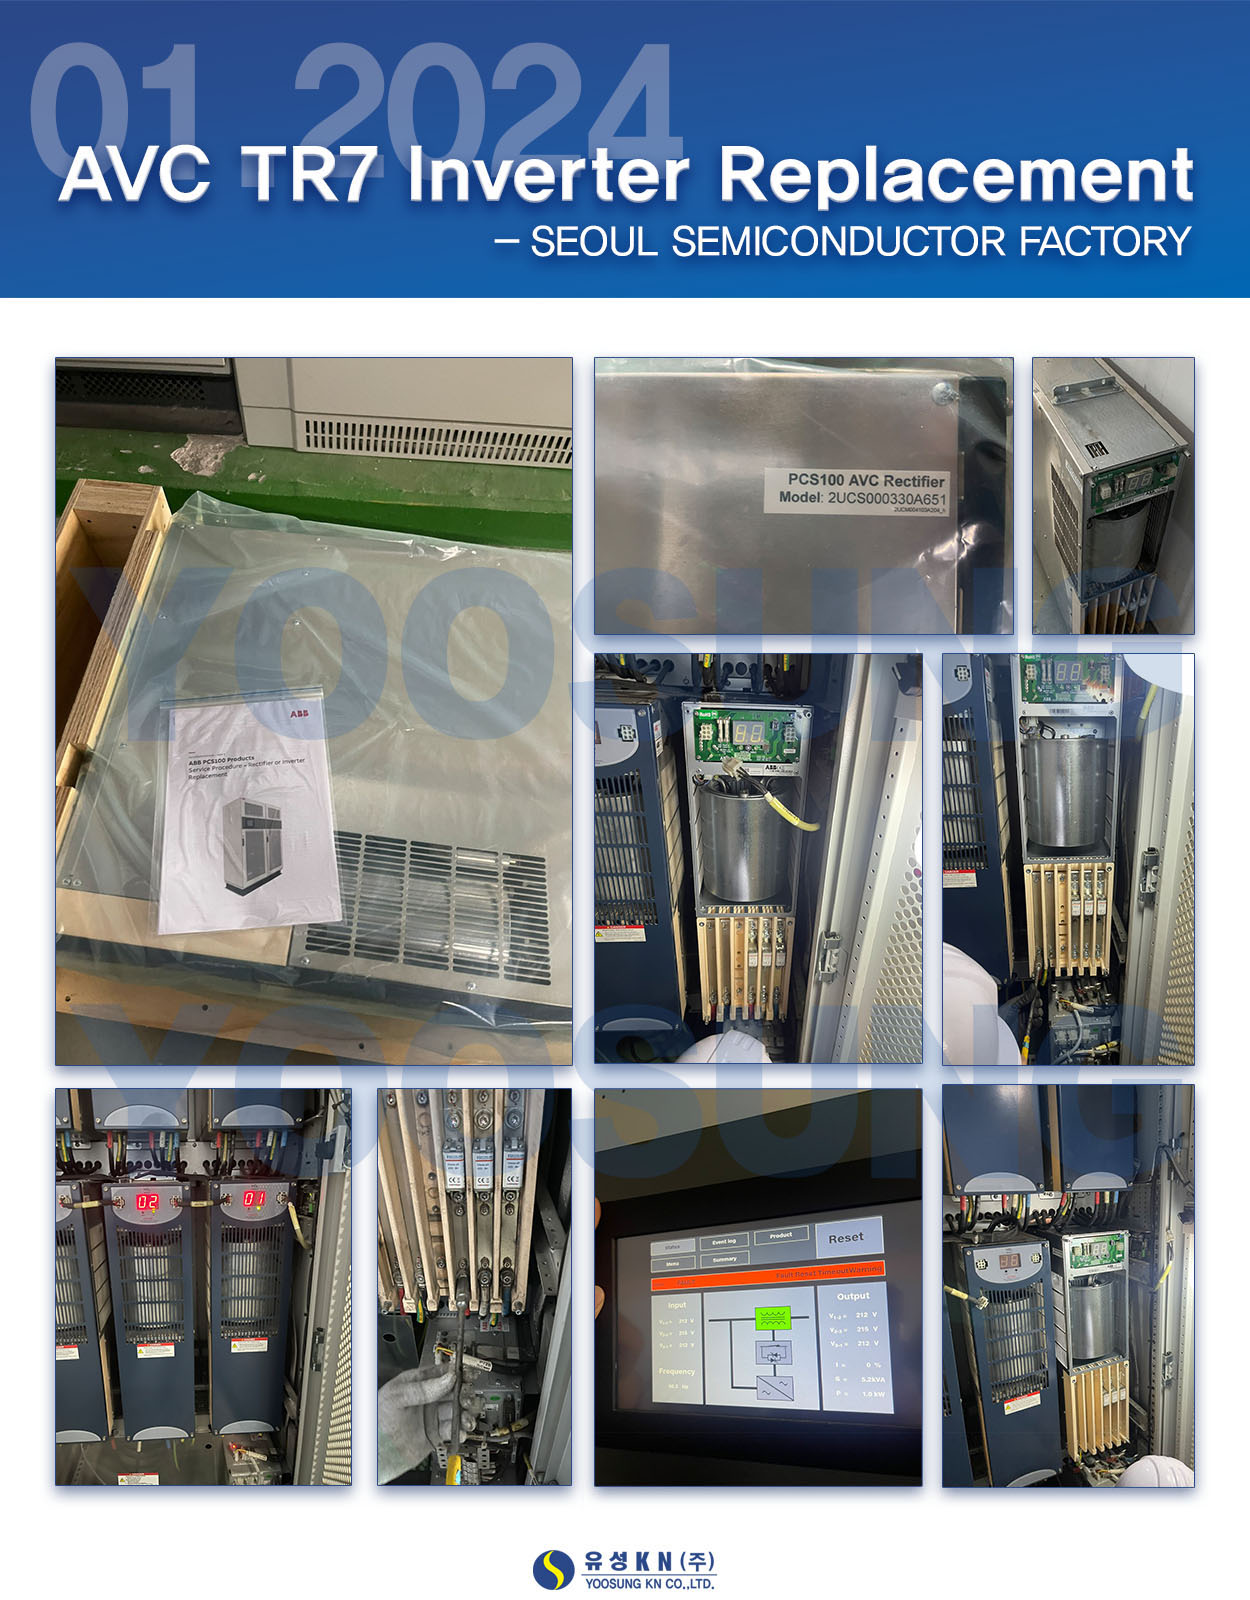 /Upload/project/project (2021-2025)/012024-avc-tr7-inverter-replacement01.jpg